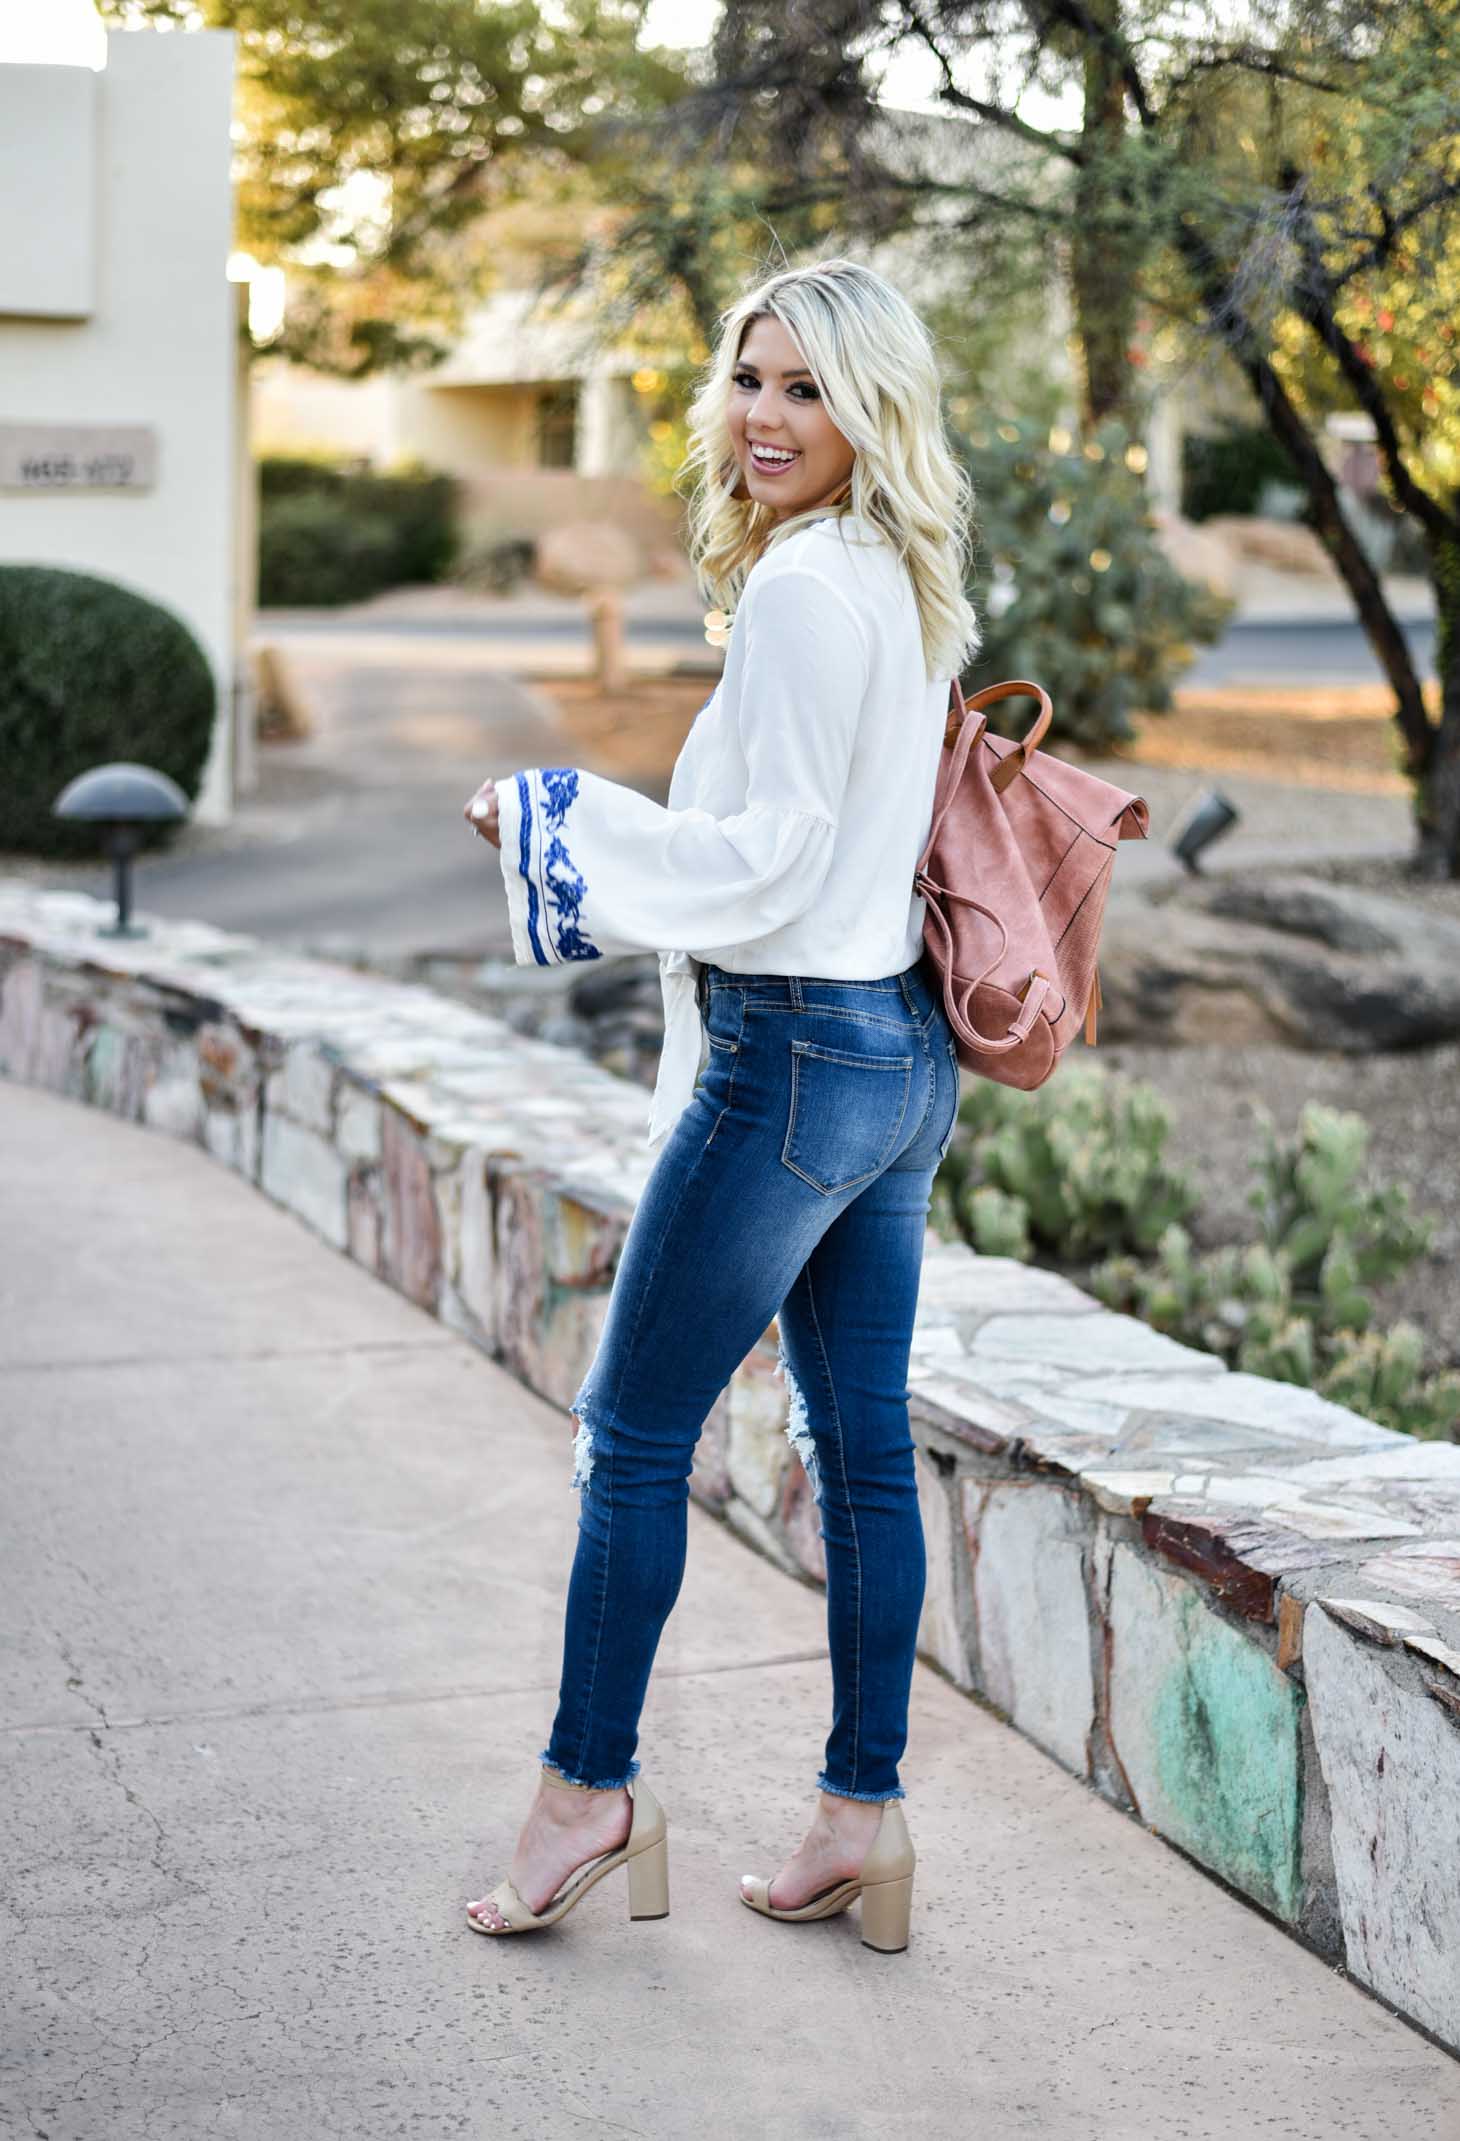 Erin Elizabeth of Wink and a Twirl in this Vici Dolls embroidered top jeans and blush backpack style perfect for summer